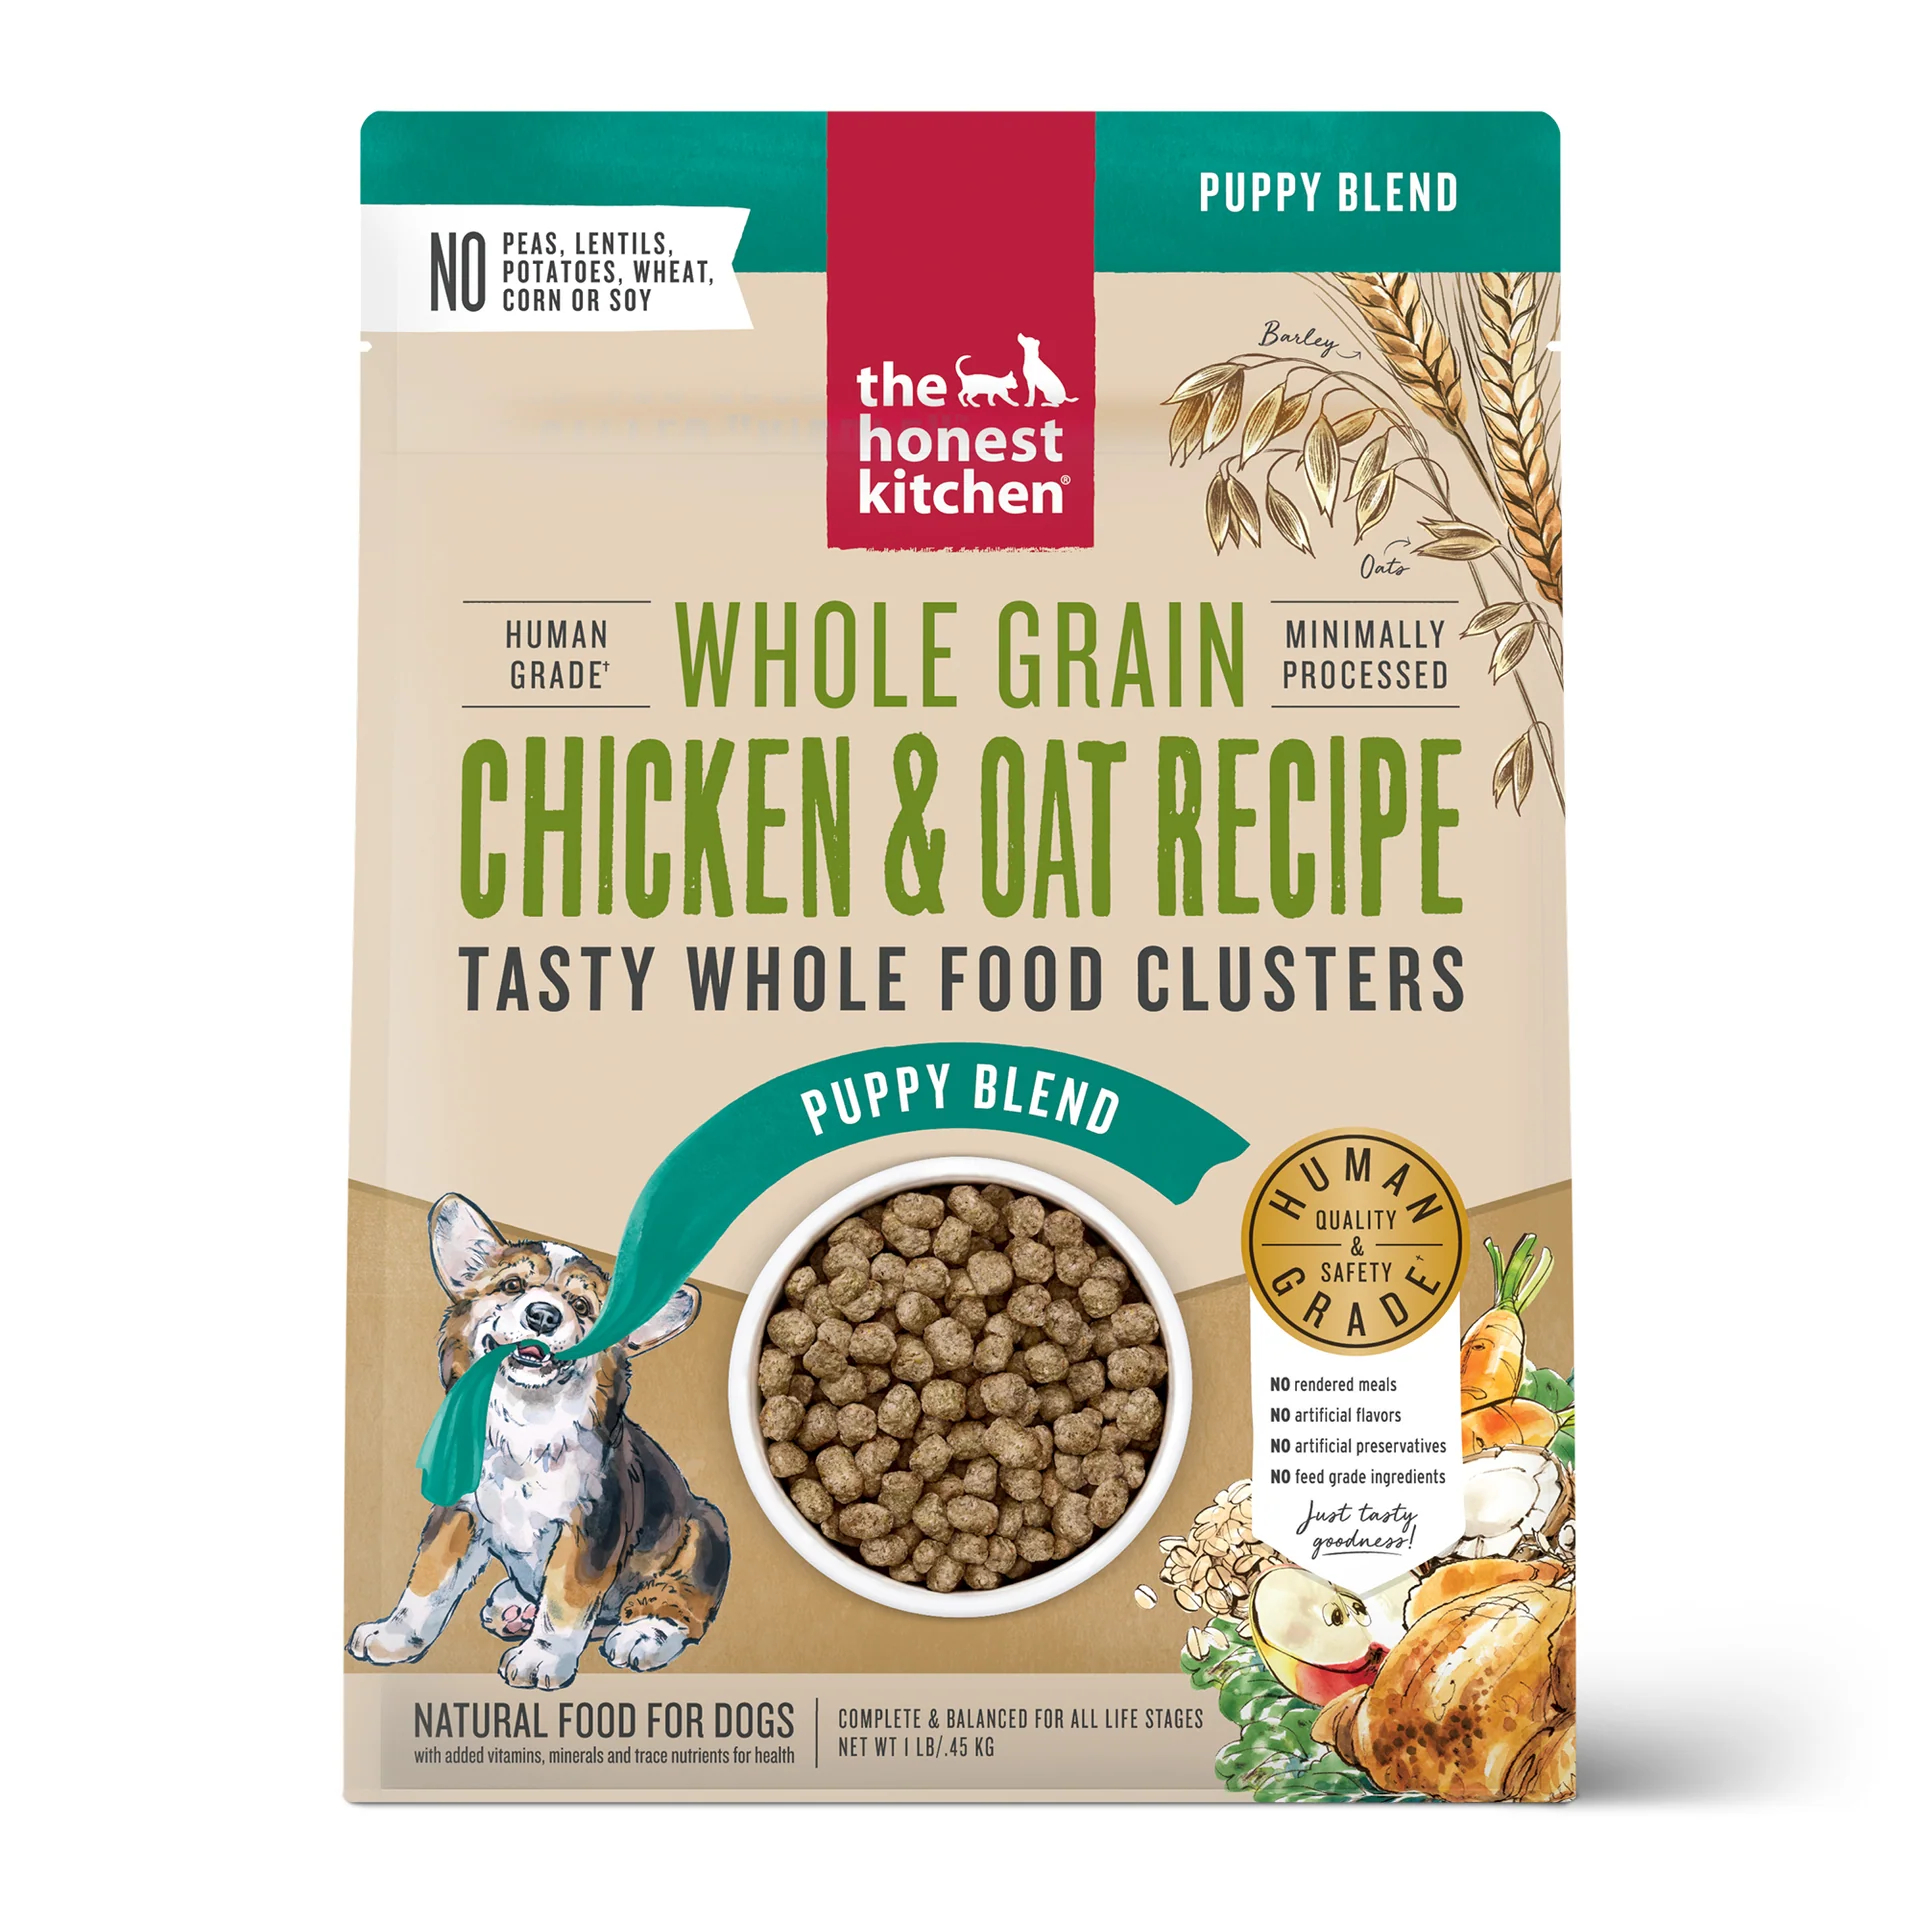 The Honest Kitchen Food Clusters Whole Grain Chicken & Oat Recipe Puppy Blend